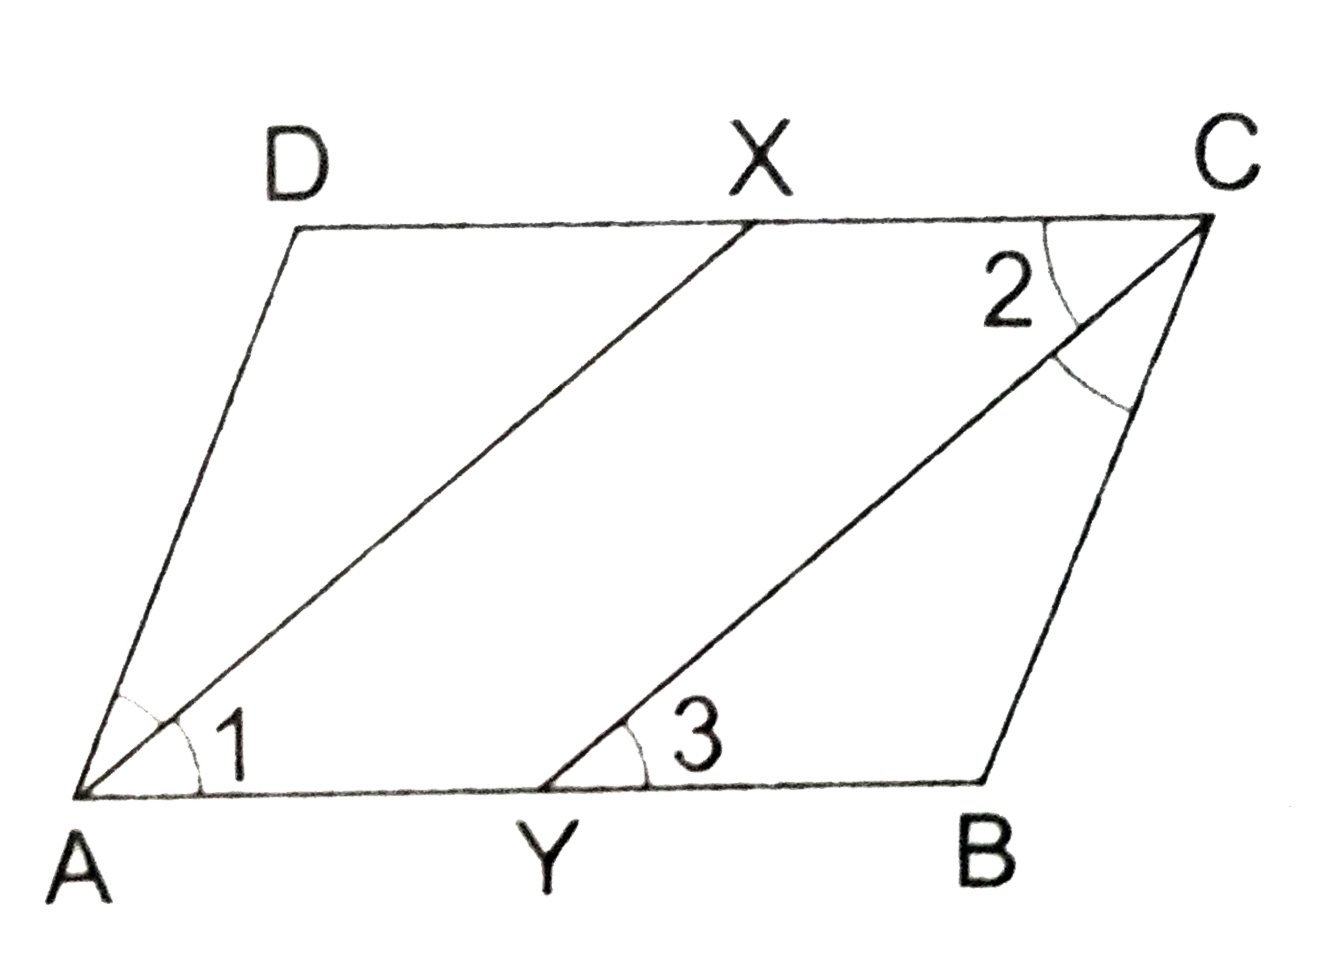 In the adjoining figure, ABCD is a parallelogram and line segments AX and CY bisect angle A and angle C  respectively. Proove that AX||CY.